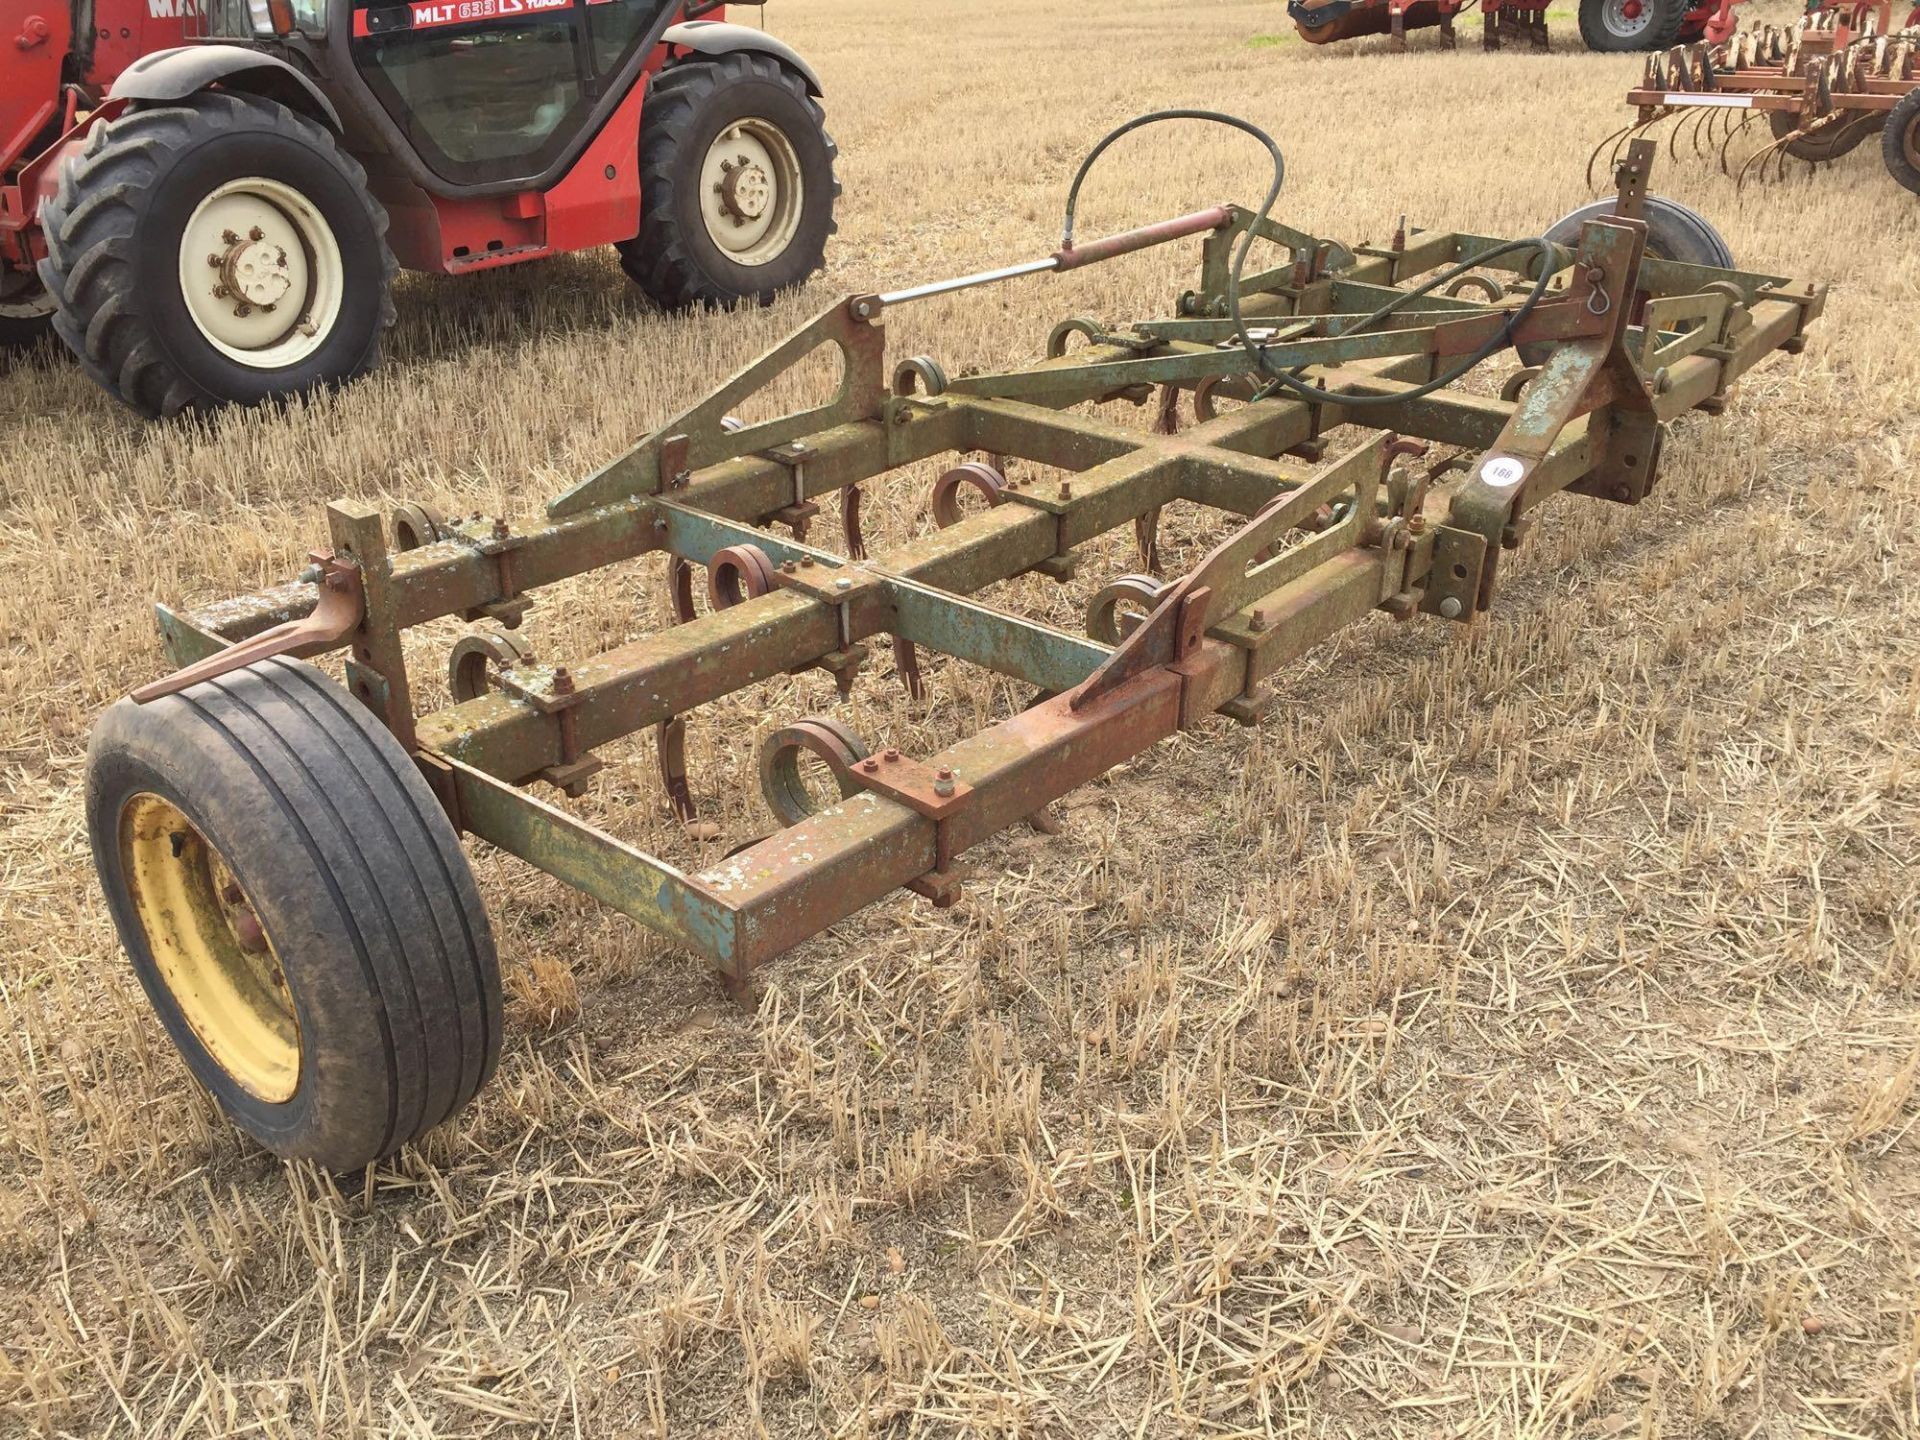 5m pigtail cultivator - Image 2 of 2